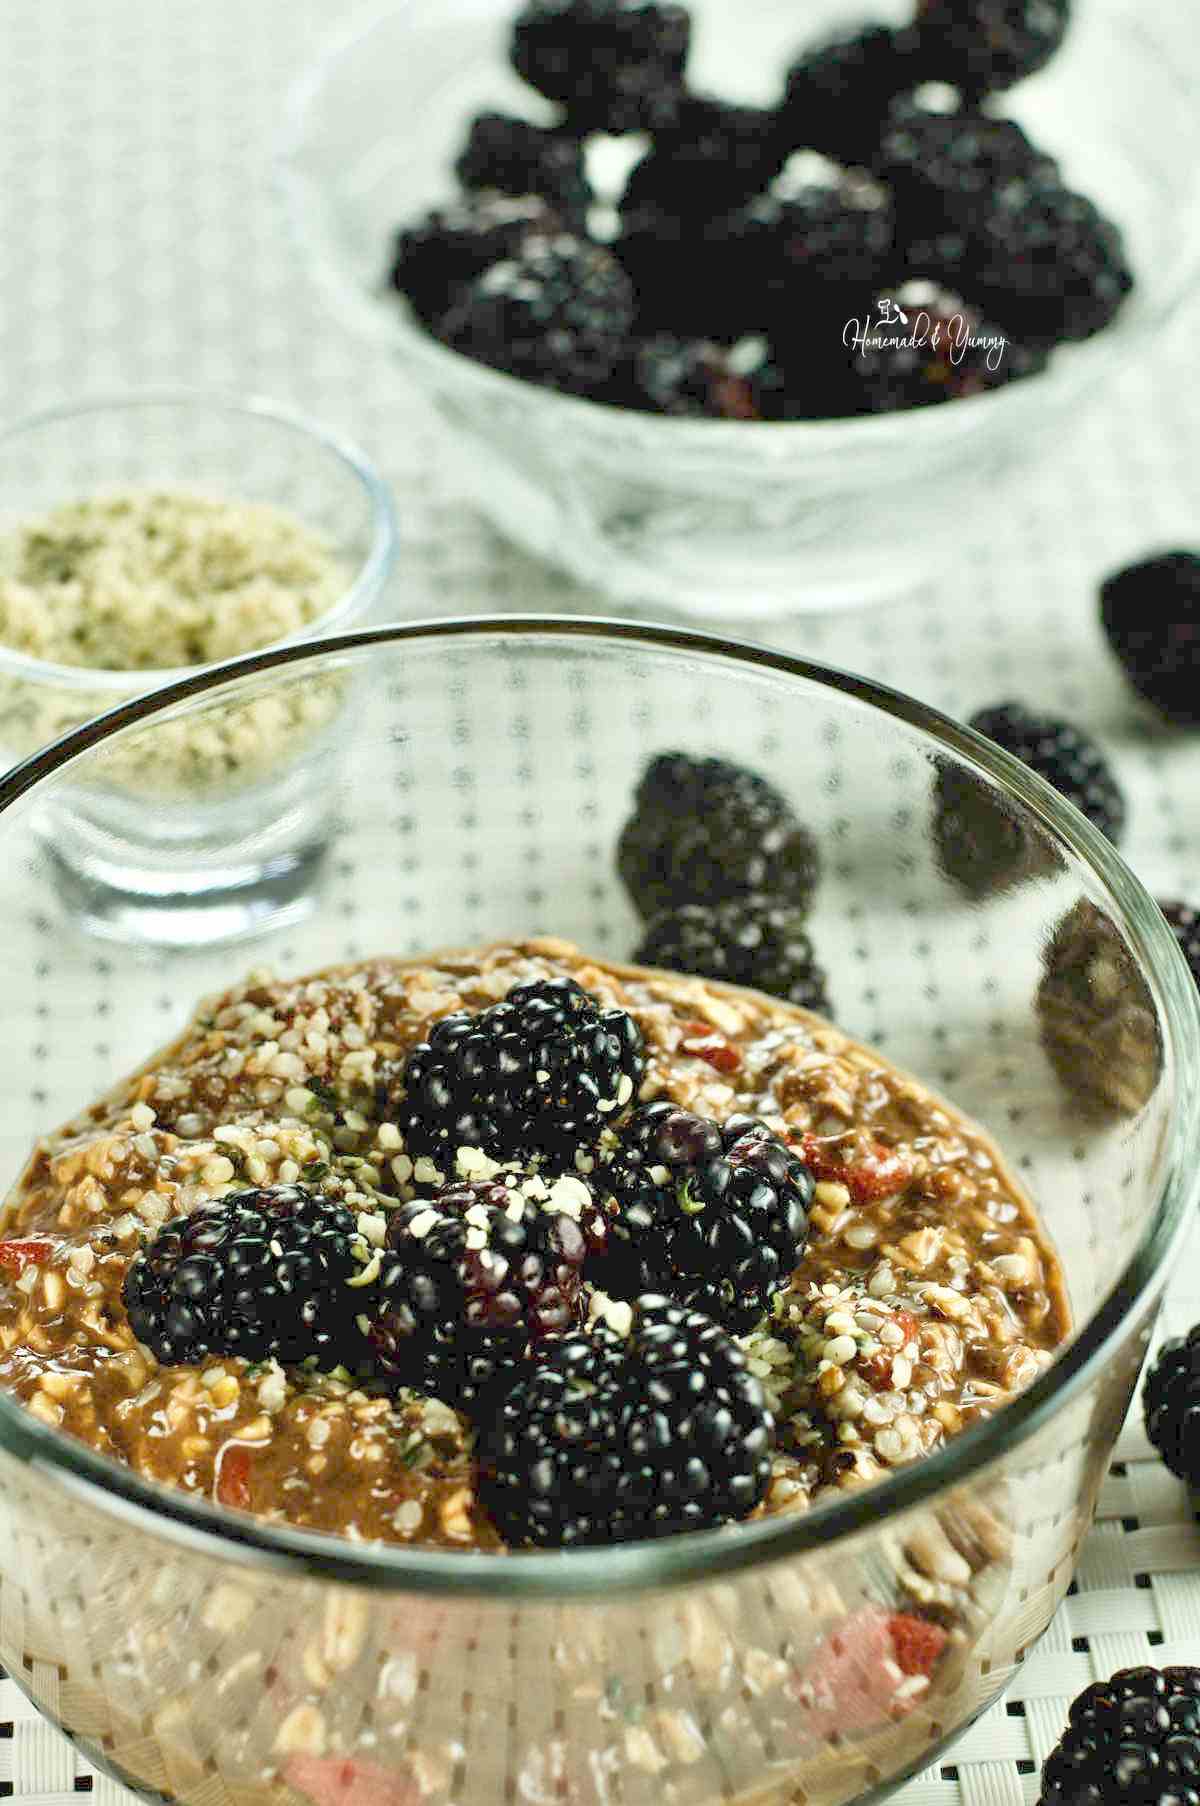 Overnight Chocolate Oats topped with blackberries.